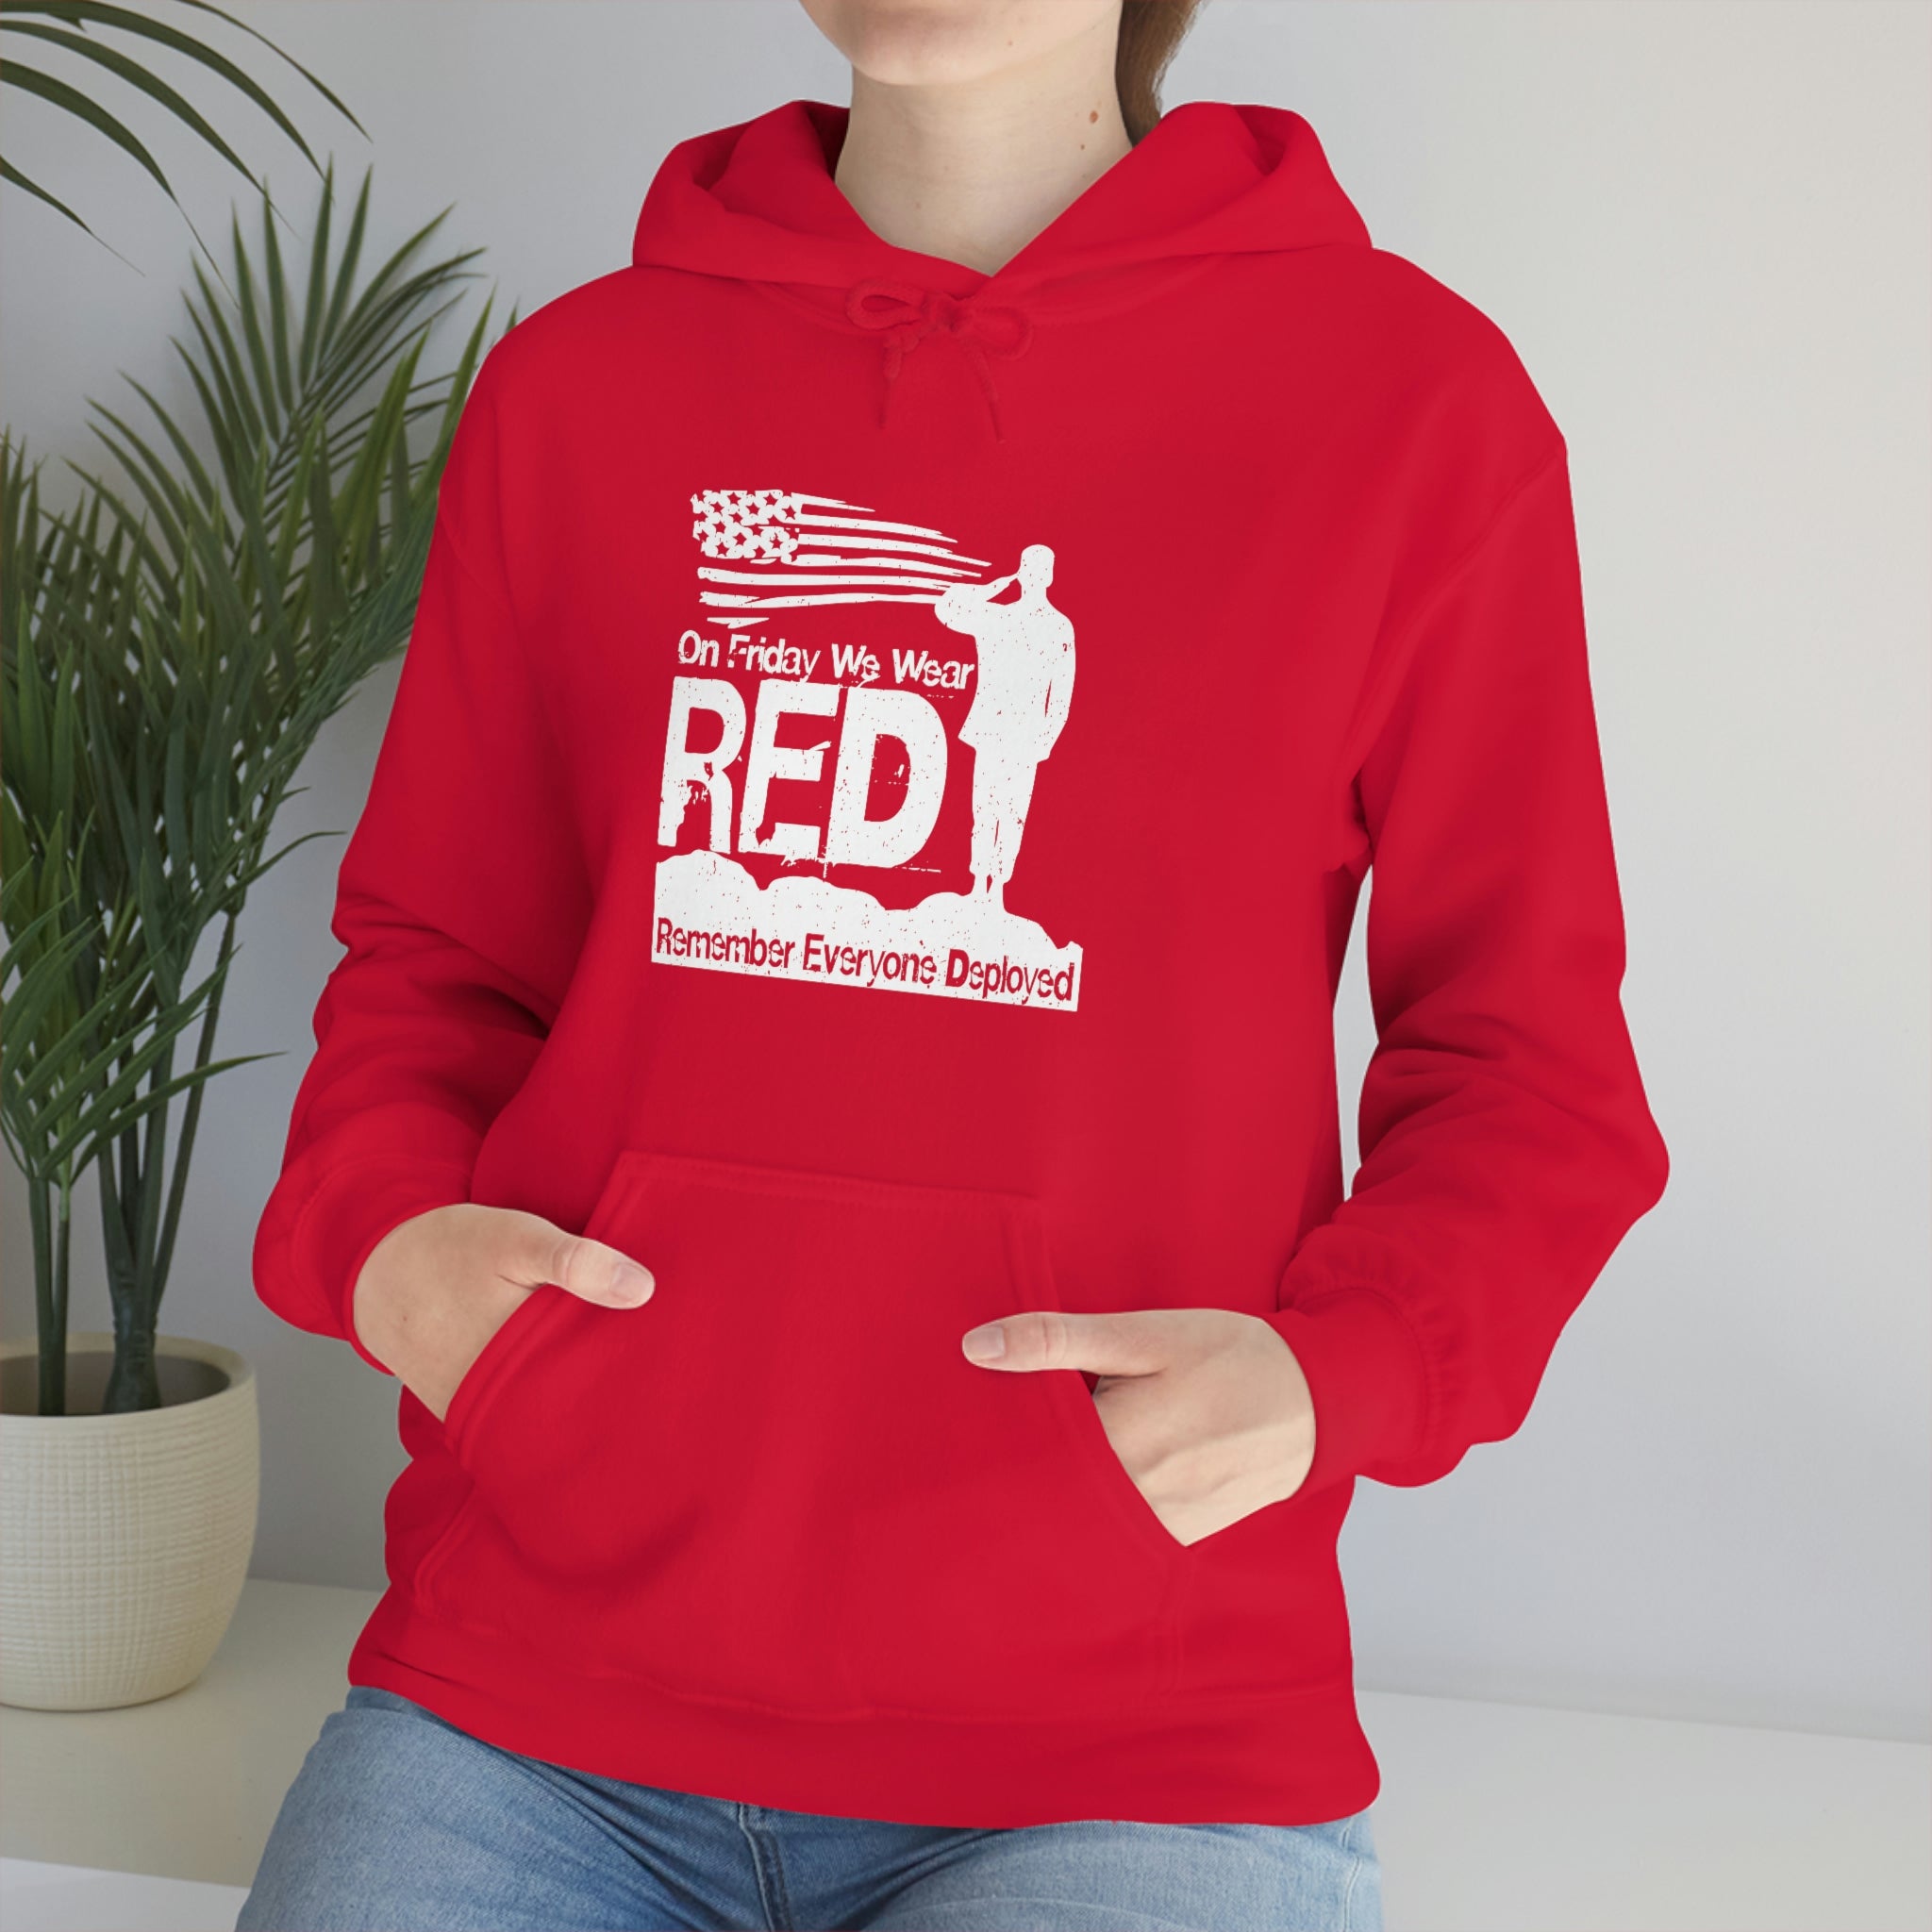 We wear RED on Friday to Remember Everyone Deployed Unisex Heavy Blend Hooded Sweatshirt